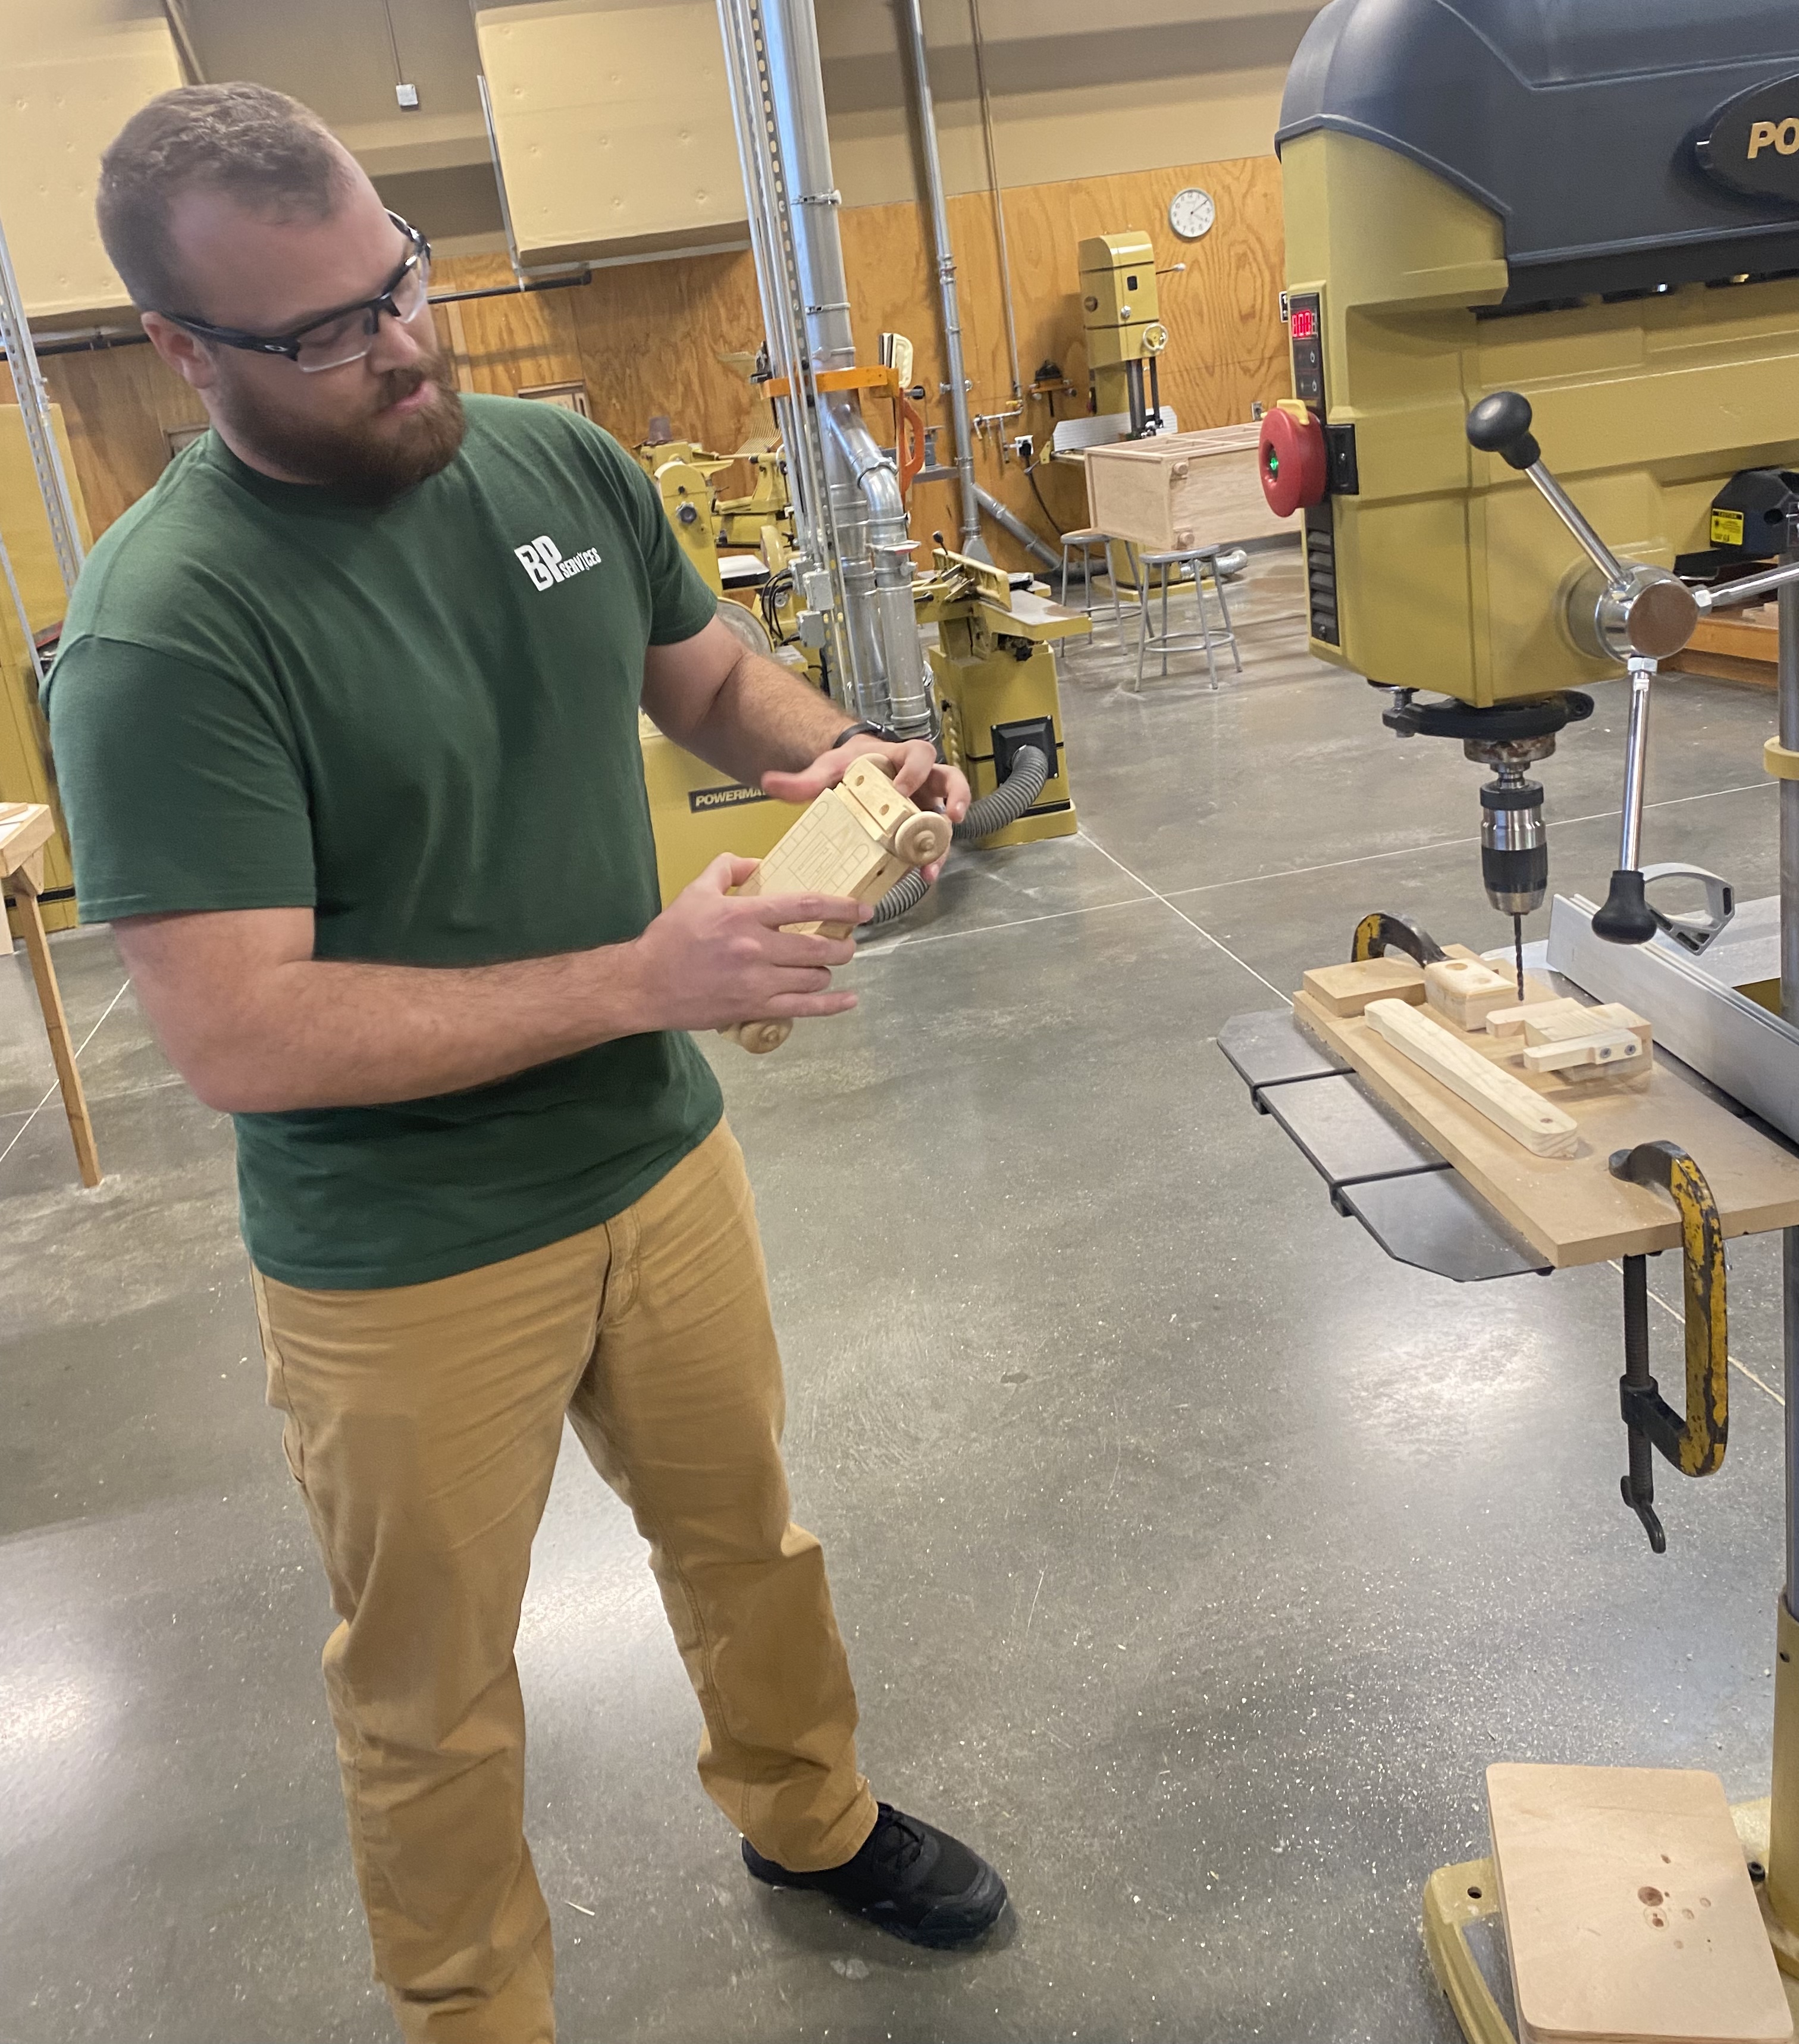 FHSU Assistant Professor Zach Pixler explains the design of the wooden toy that will be assembled at Saturday’s annual toy-building event.